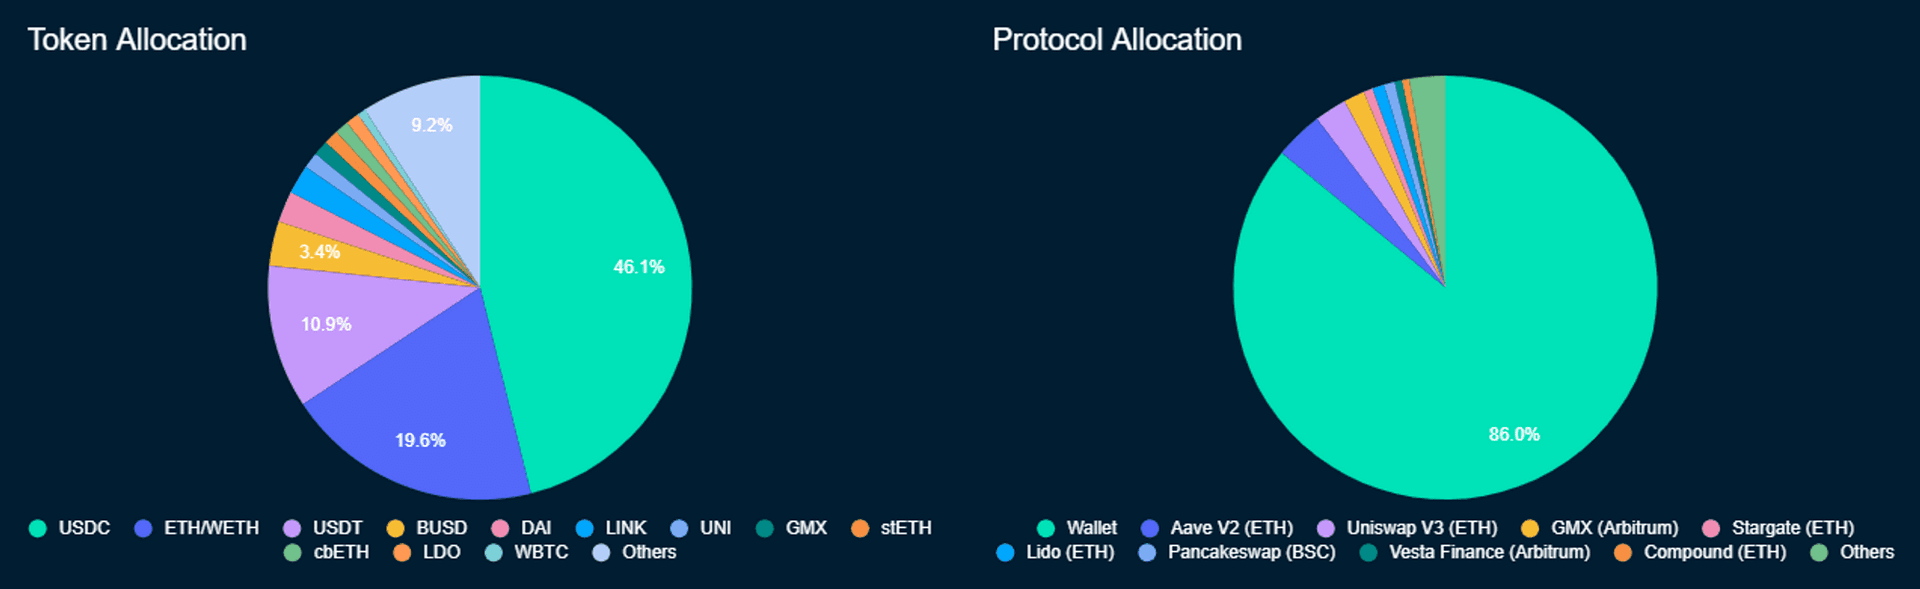 Token and protocol allocation of large FTX withdrawers via Ethereum network